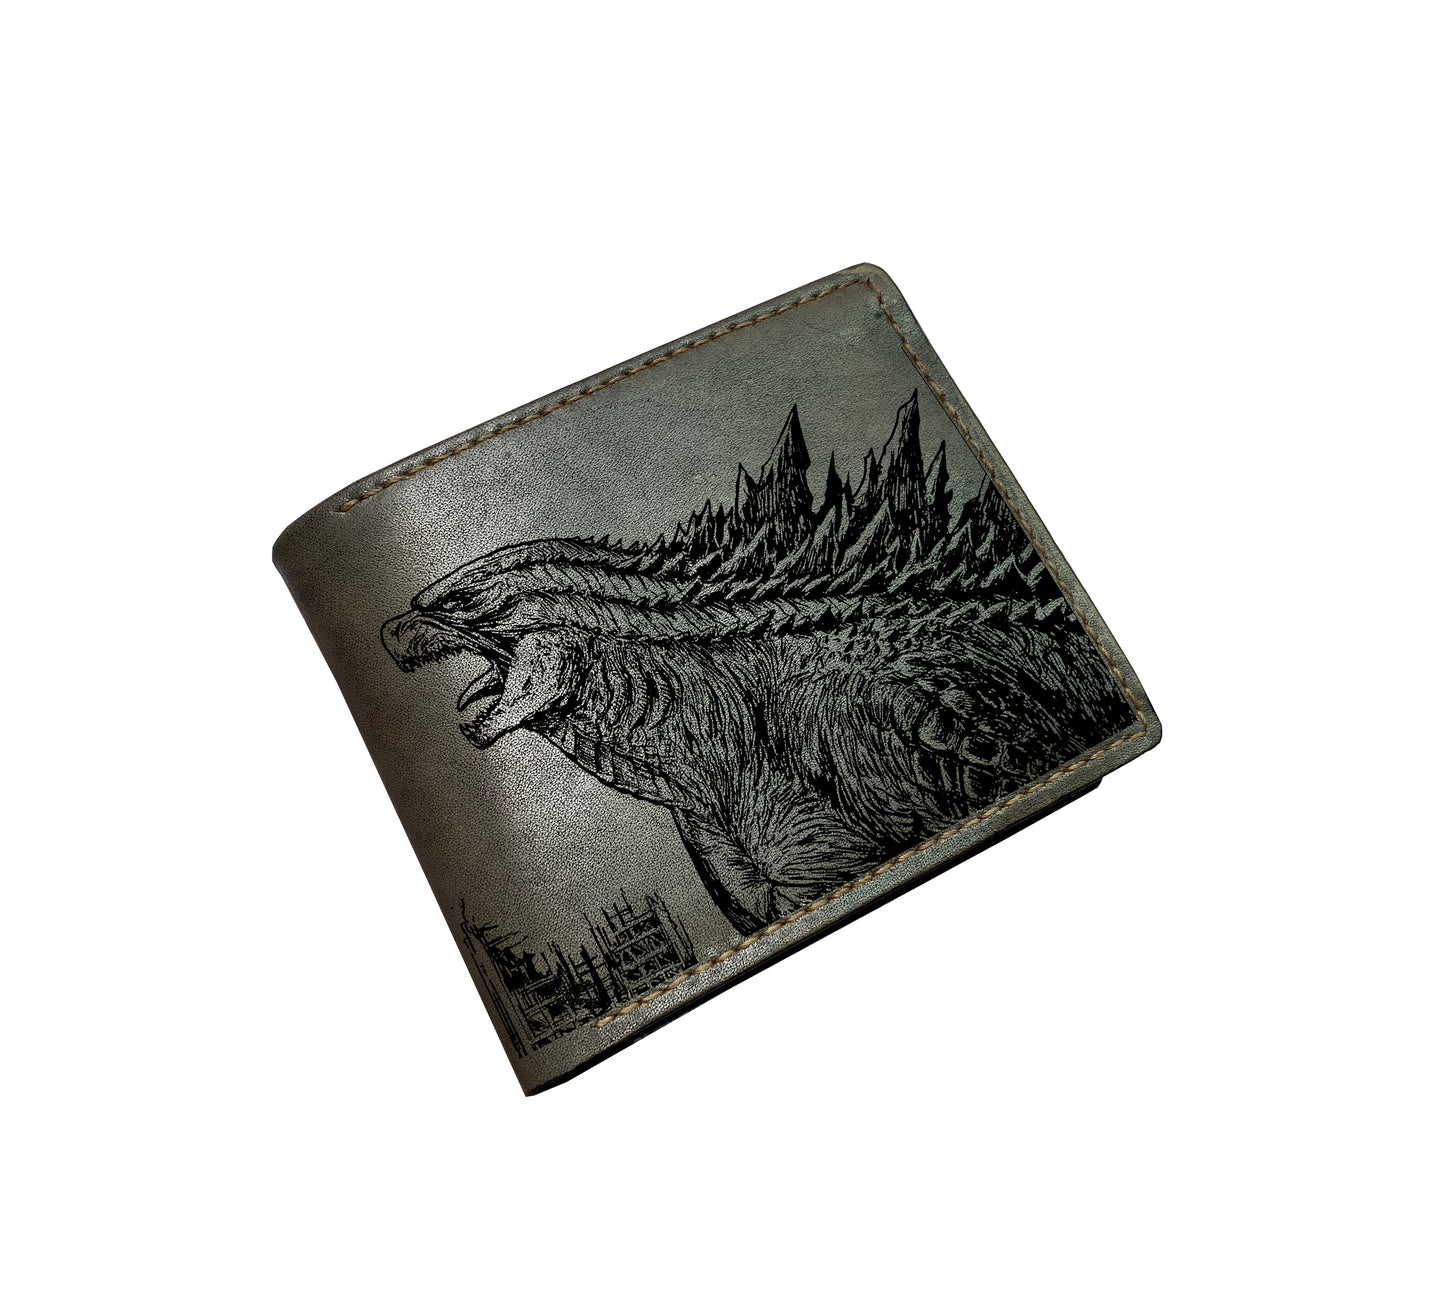 Mayan Corner - Personalized leather men's wallet, custom engraving name wallet, Godzilla leather art wallet, gift for dad